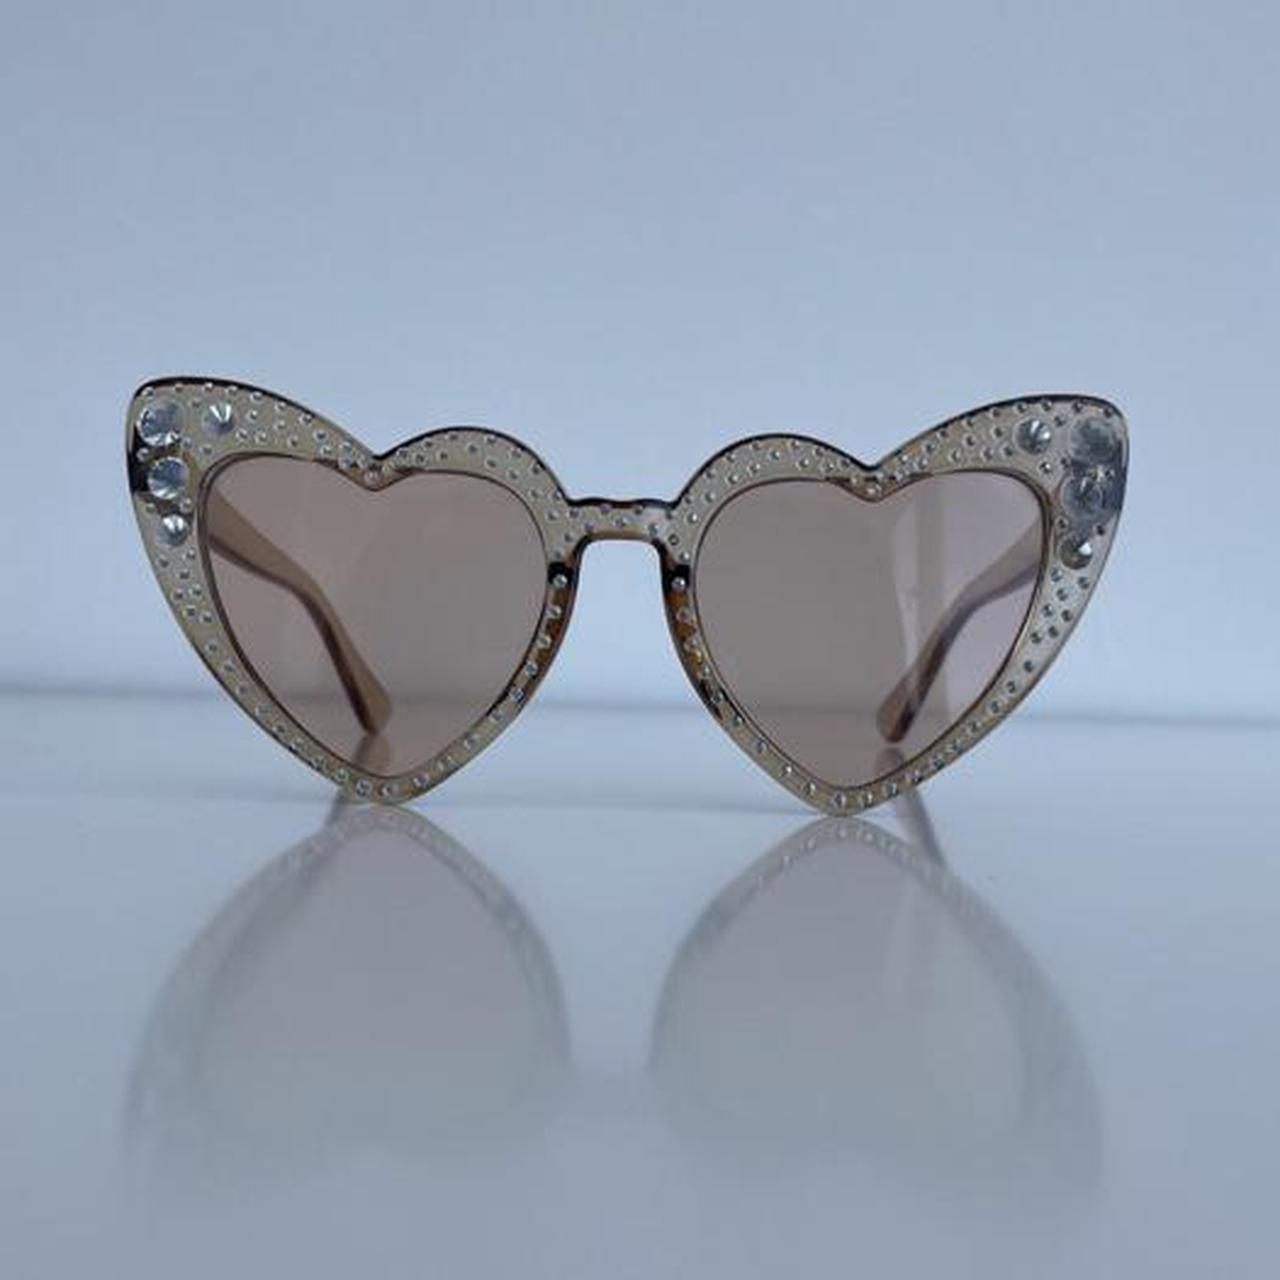 Product Image 4 - Stunning heart sunglasses In a